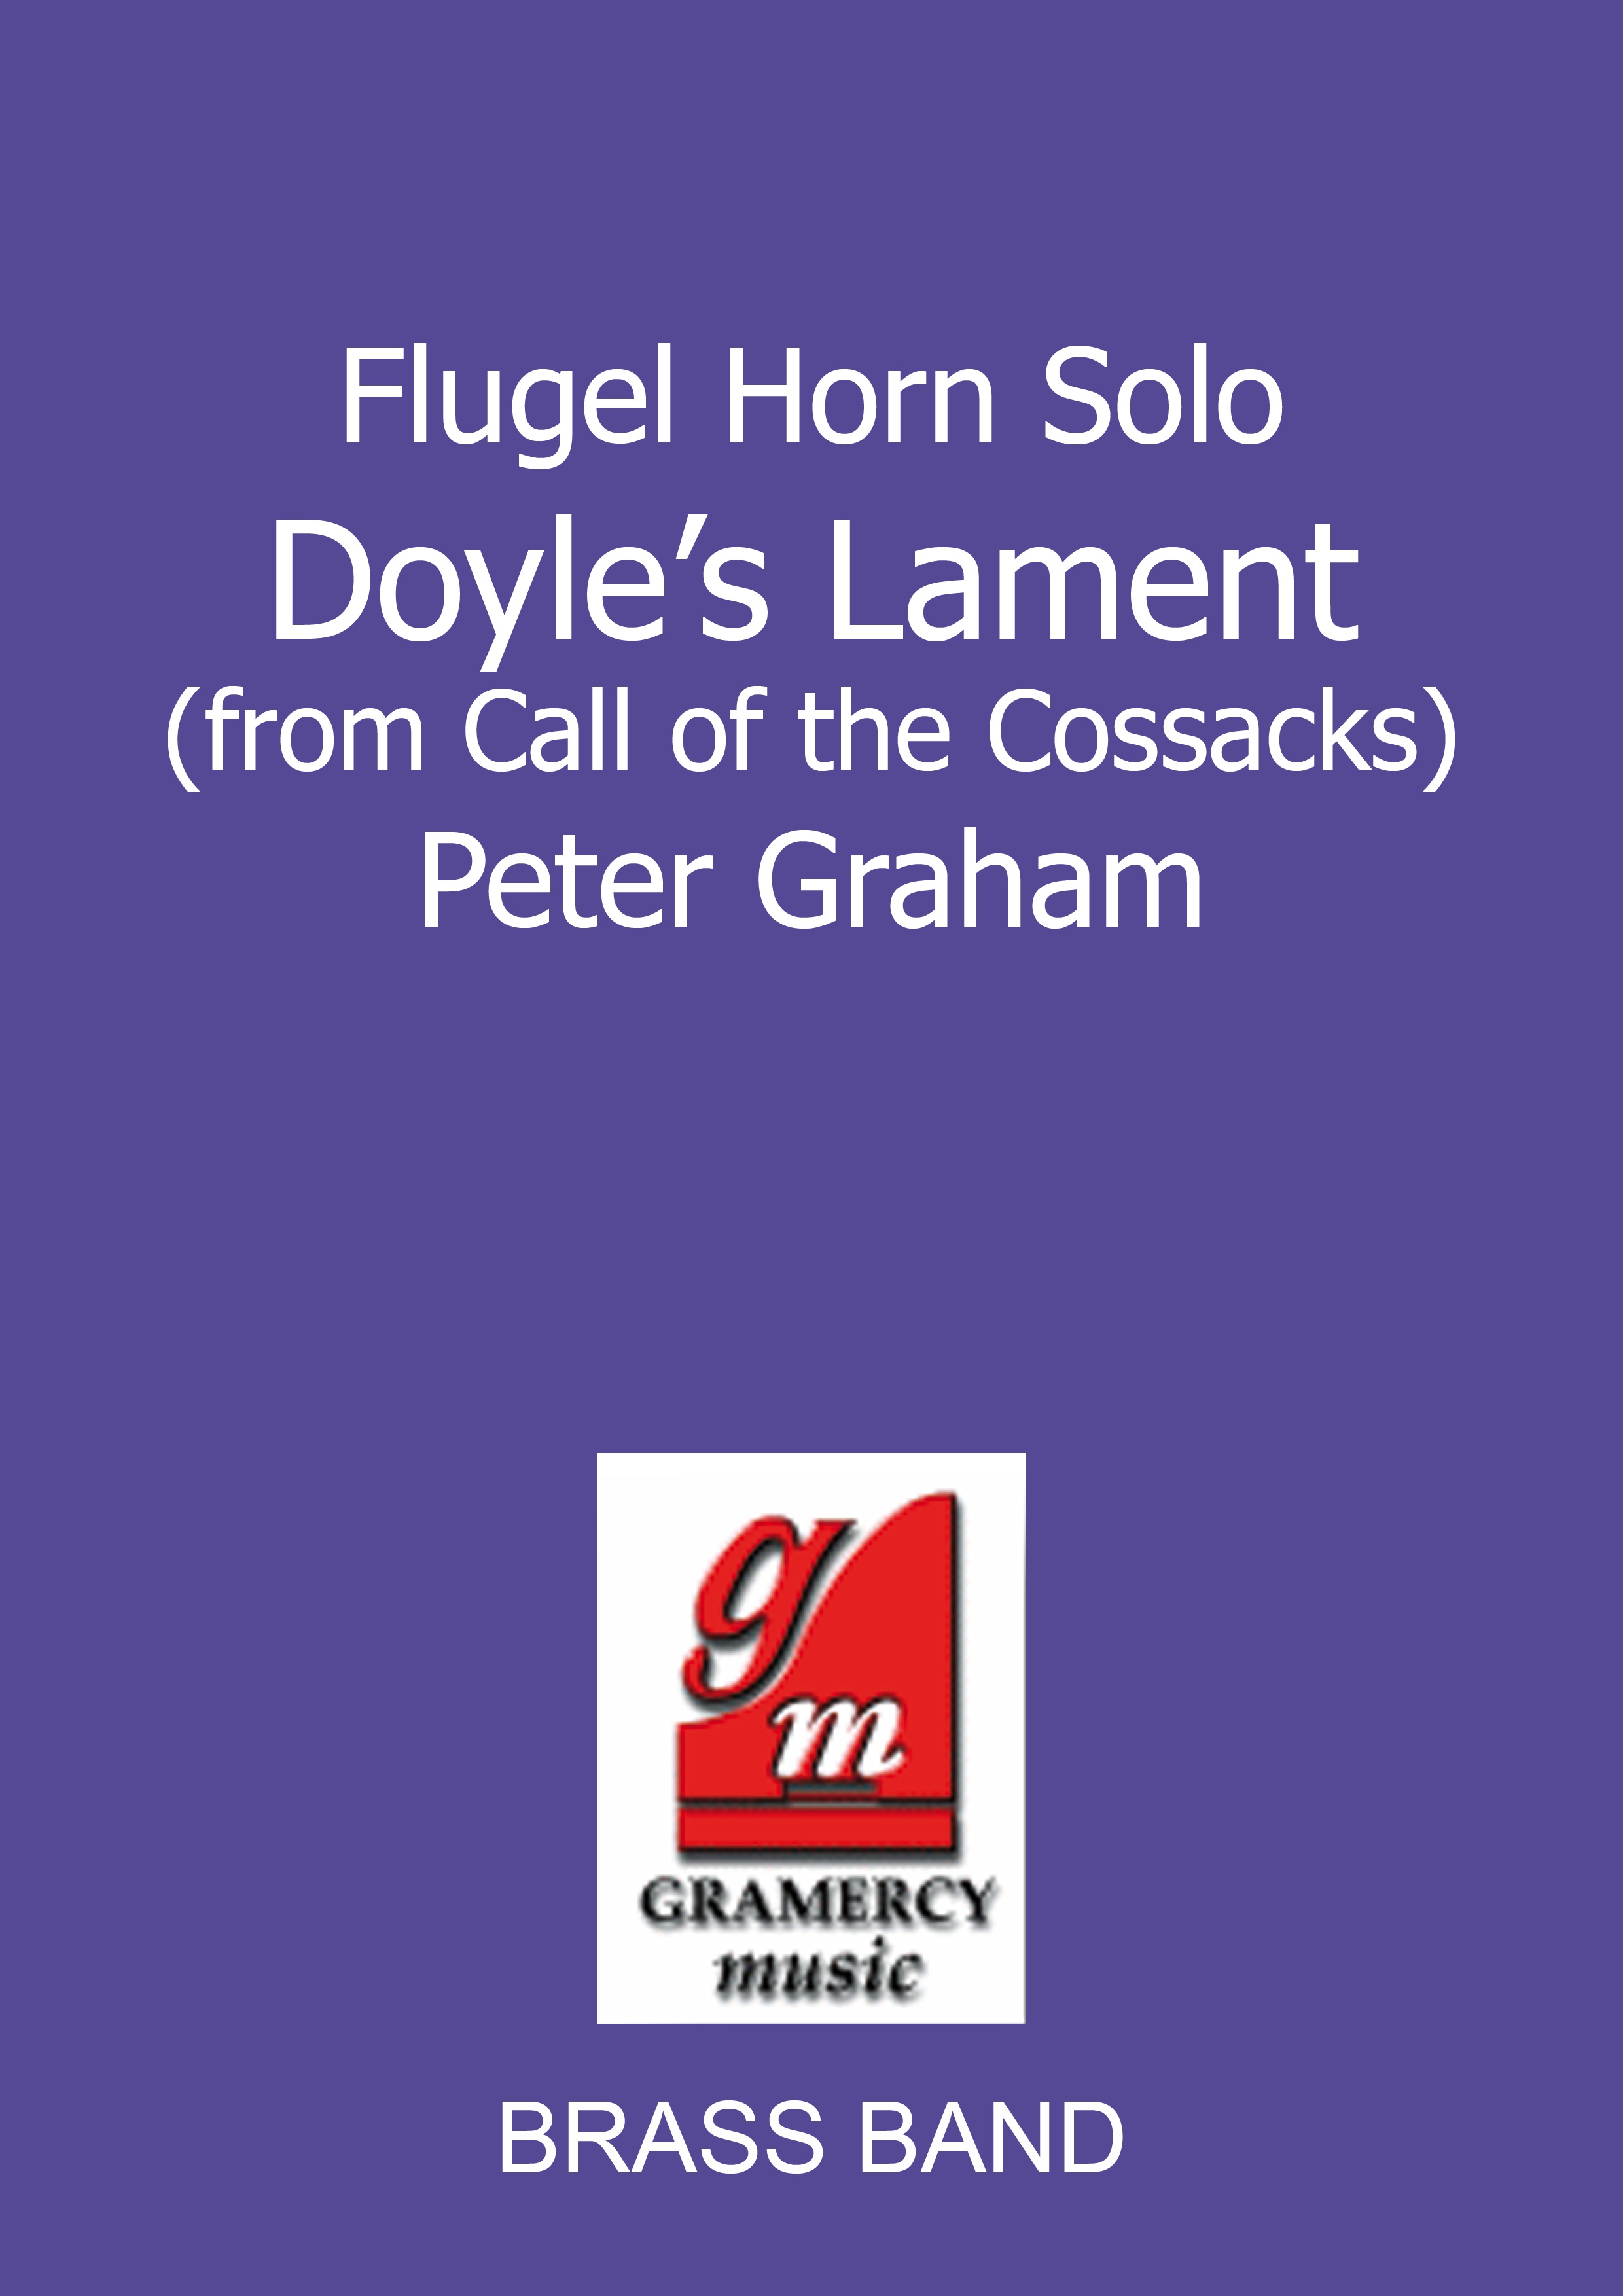 Doyle's Lament (from Call of the Cossacks) (Flugel Horn Solo with Brass Band)